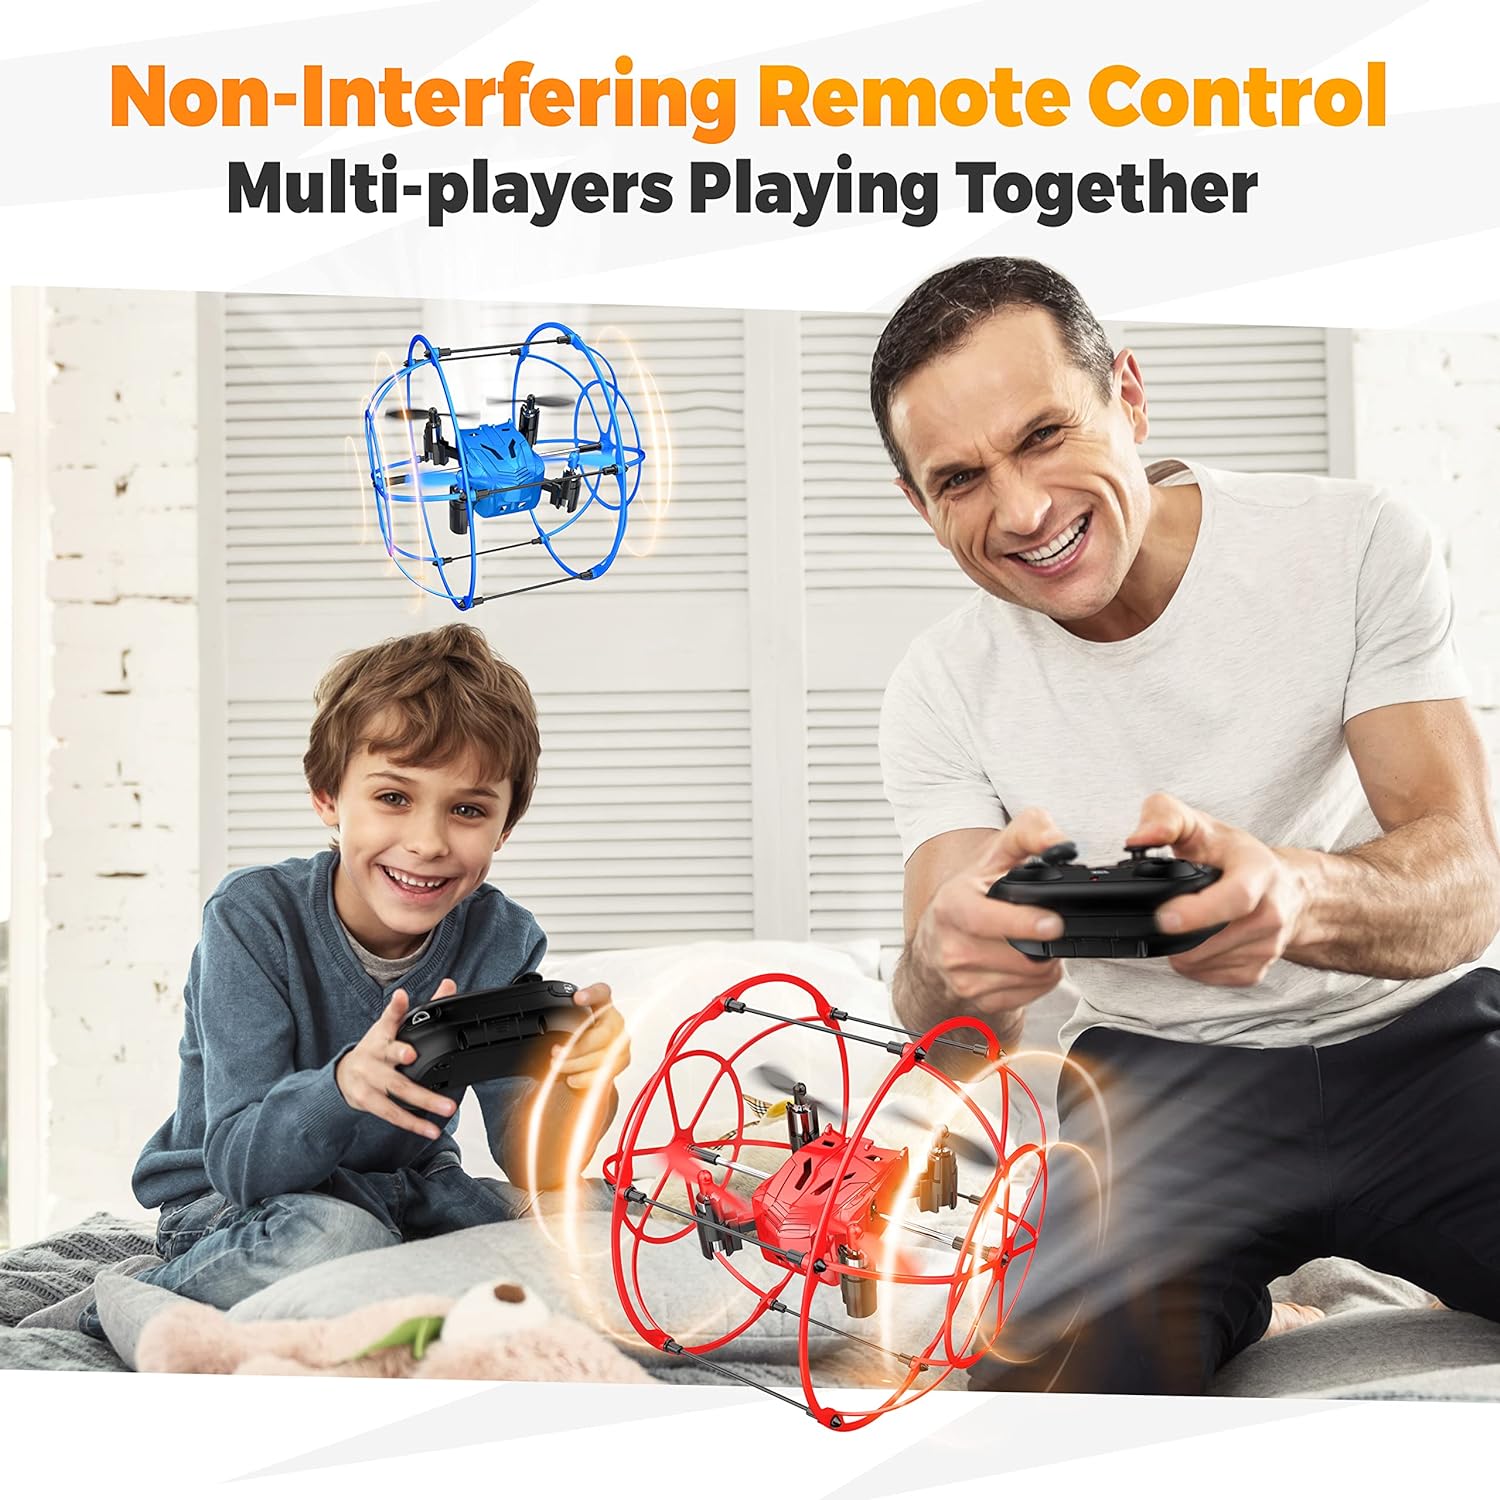 BEZGAR HQ053 Remote Control Mini Drone for Kids - Remote Control Spherical Rolling Quadcopter 360 Degree Flip Christmas Birthday Gift Indoor Outdoor Toys for Boys Age 4 5 6 7 8-12 RC Drone Beginner